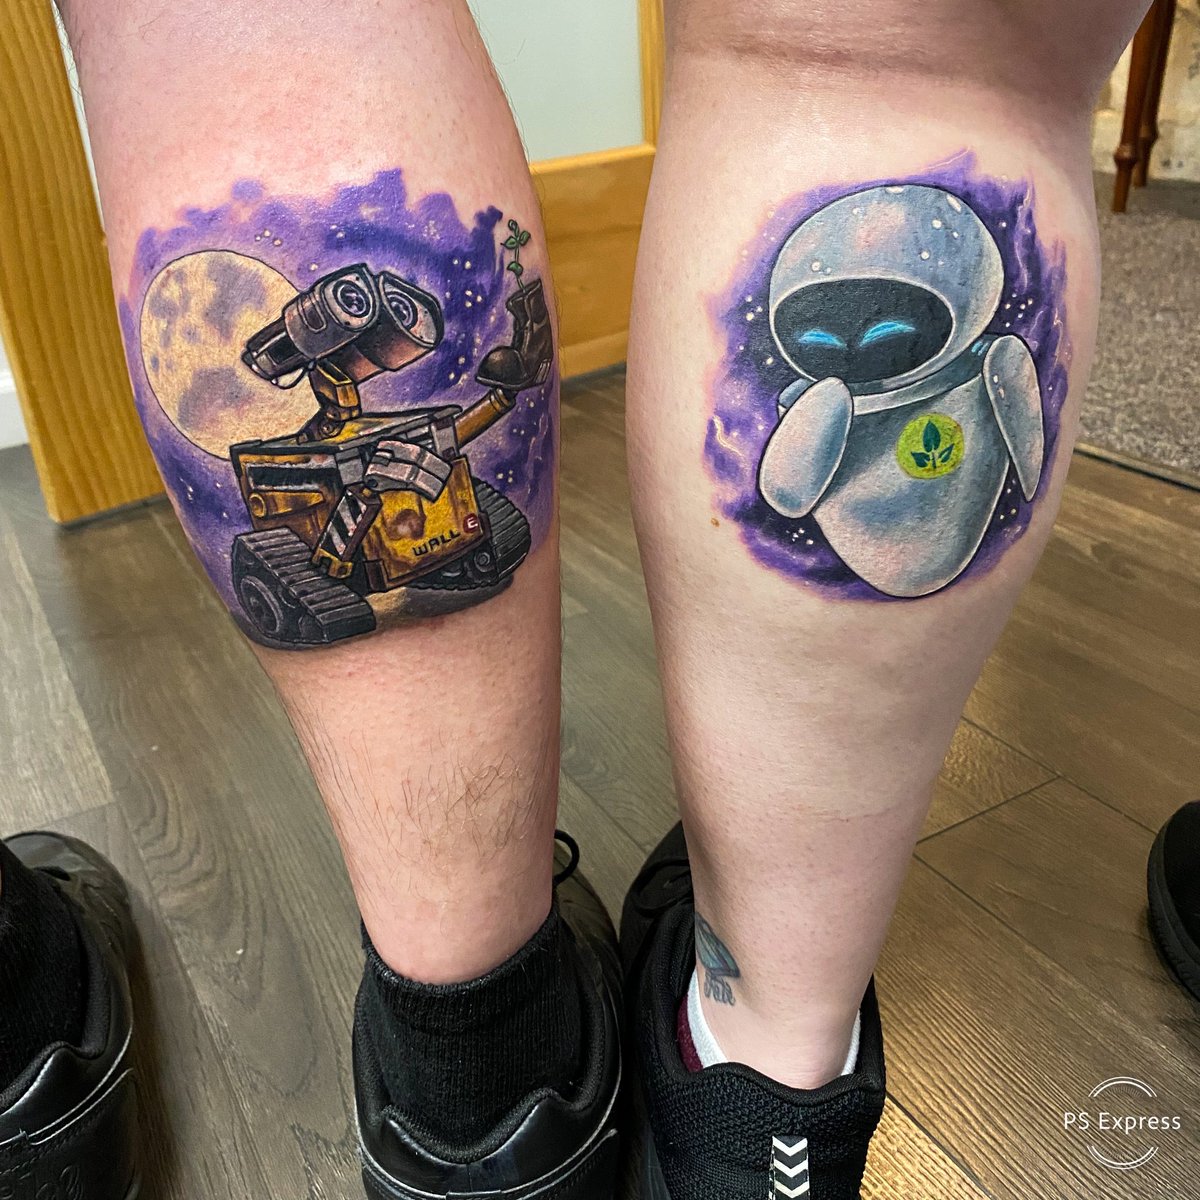 Wall-E and Eve couples tattoos done by Meghan Patrick at our Brooklawn, NJ studio. #12ozstudios #ladytattooers #walle #pixar #couplestattoos